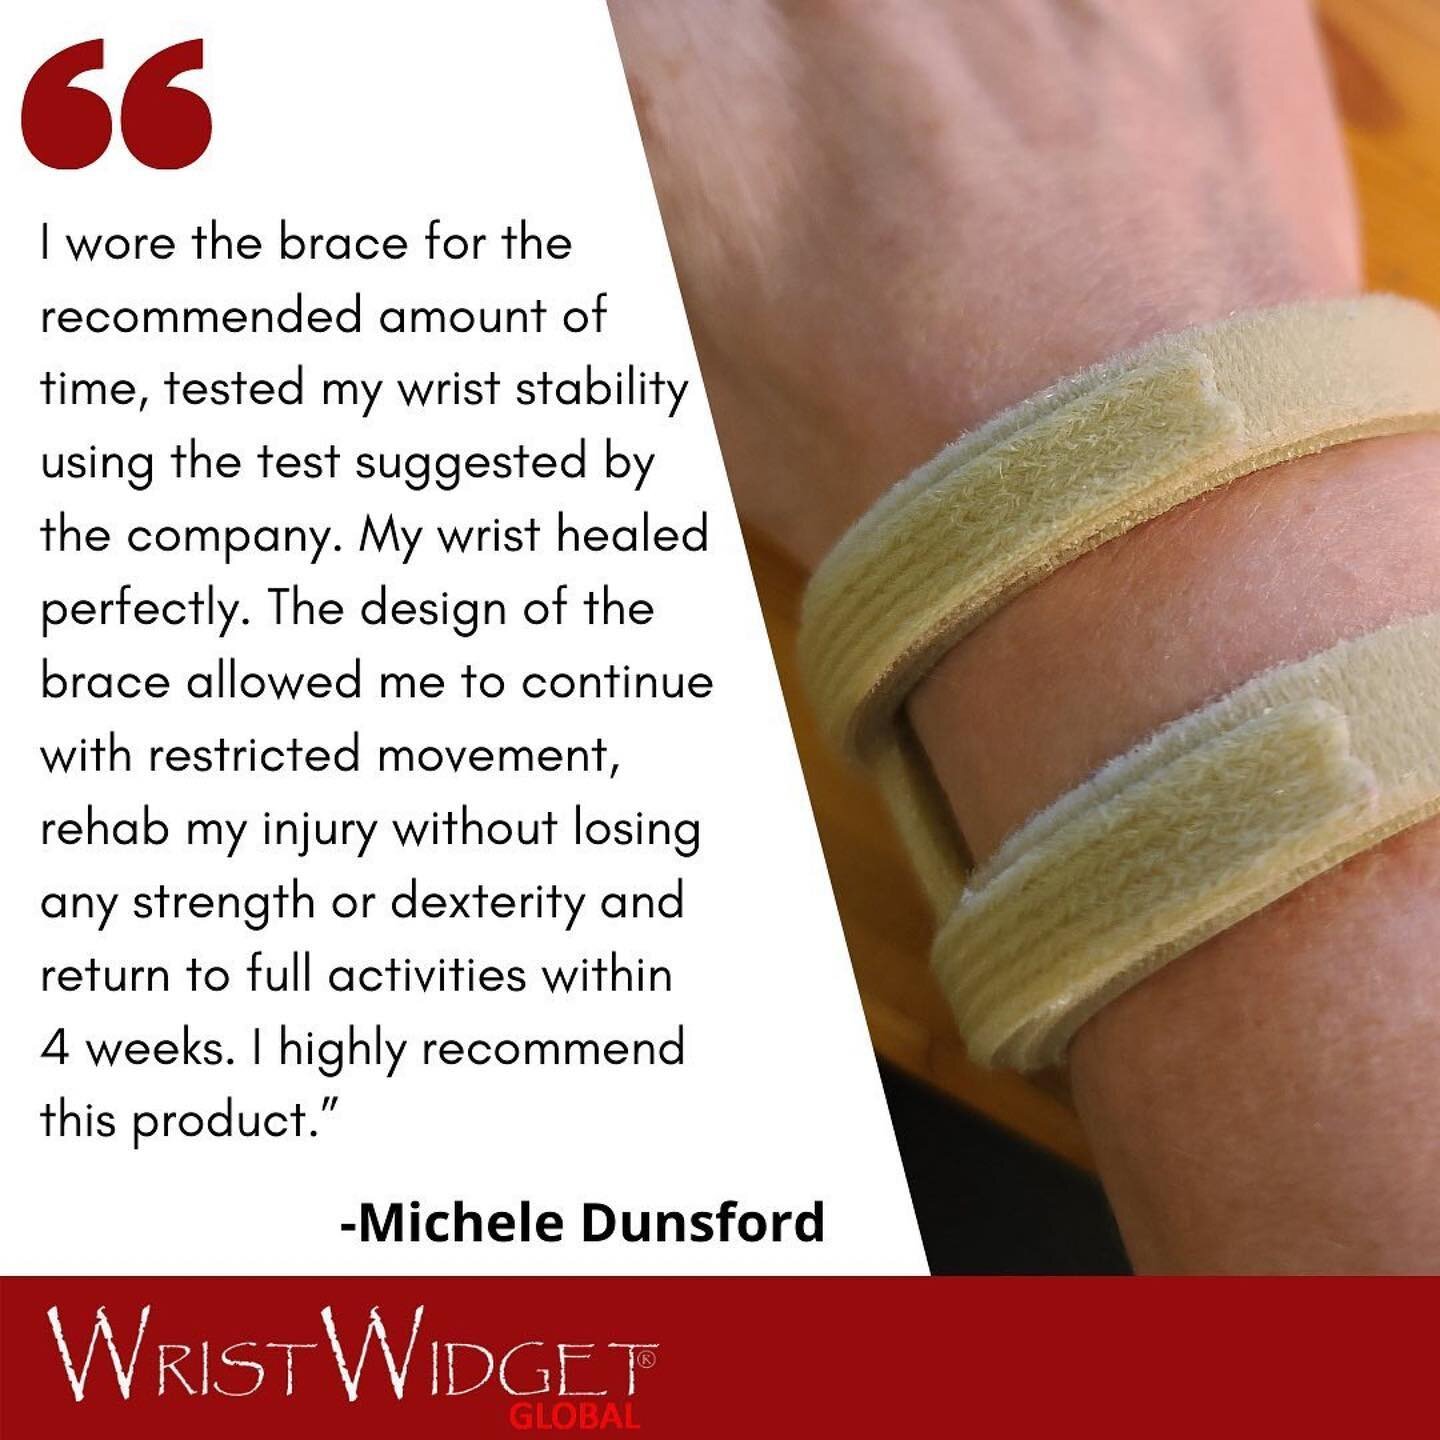 &ldquo;I purchased the Wrist Widget as my research indicated it was designed specifically for my injury, a TFCC, triangular fibrocartilage complex injury.  I originally had some comfort issues with the brace materials, contacted the customer service 